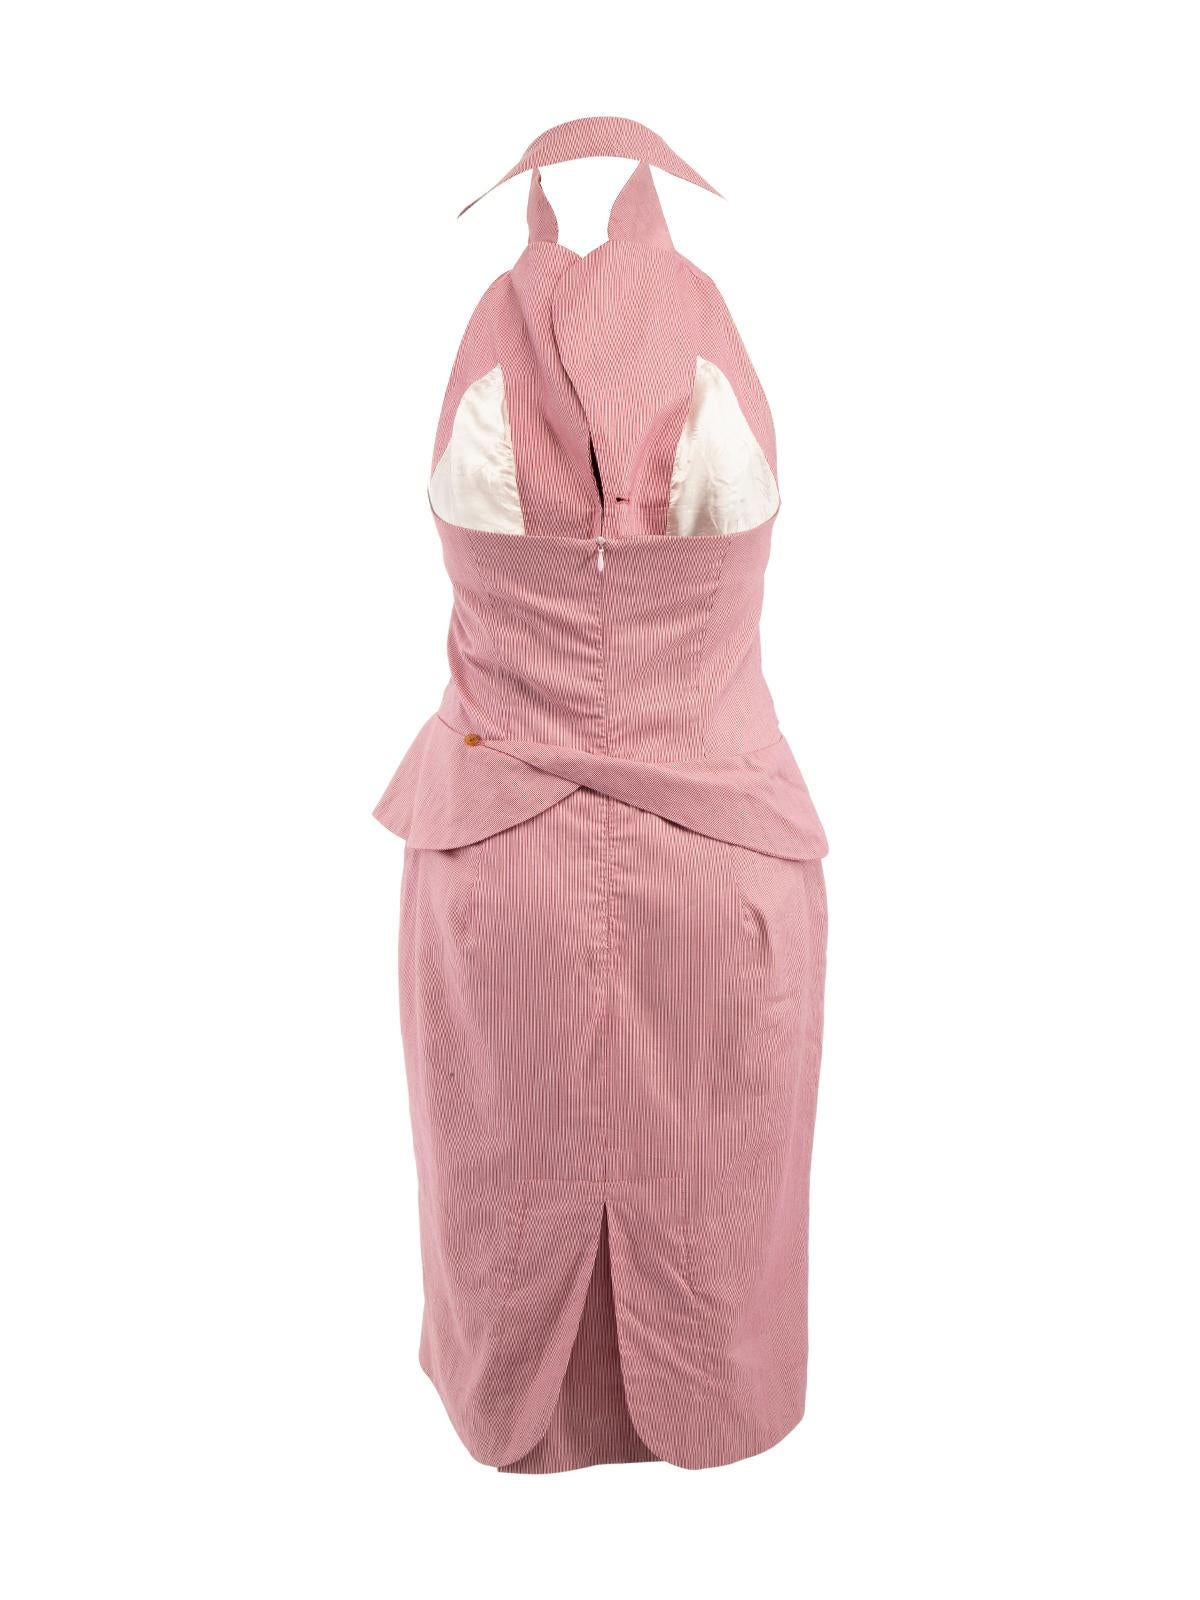 Pre-Loved Vivienne Westwood Women's Halter Neck Dress with Pockets In Excellent Condition In London, GB